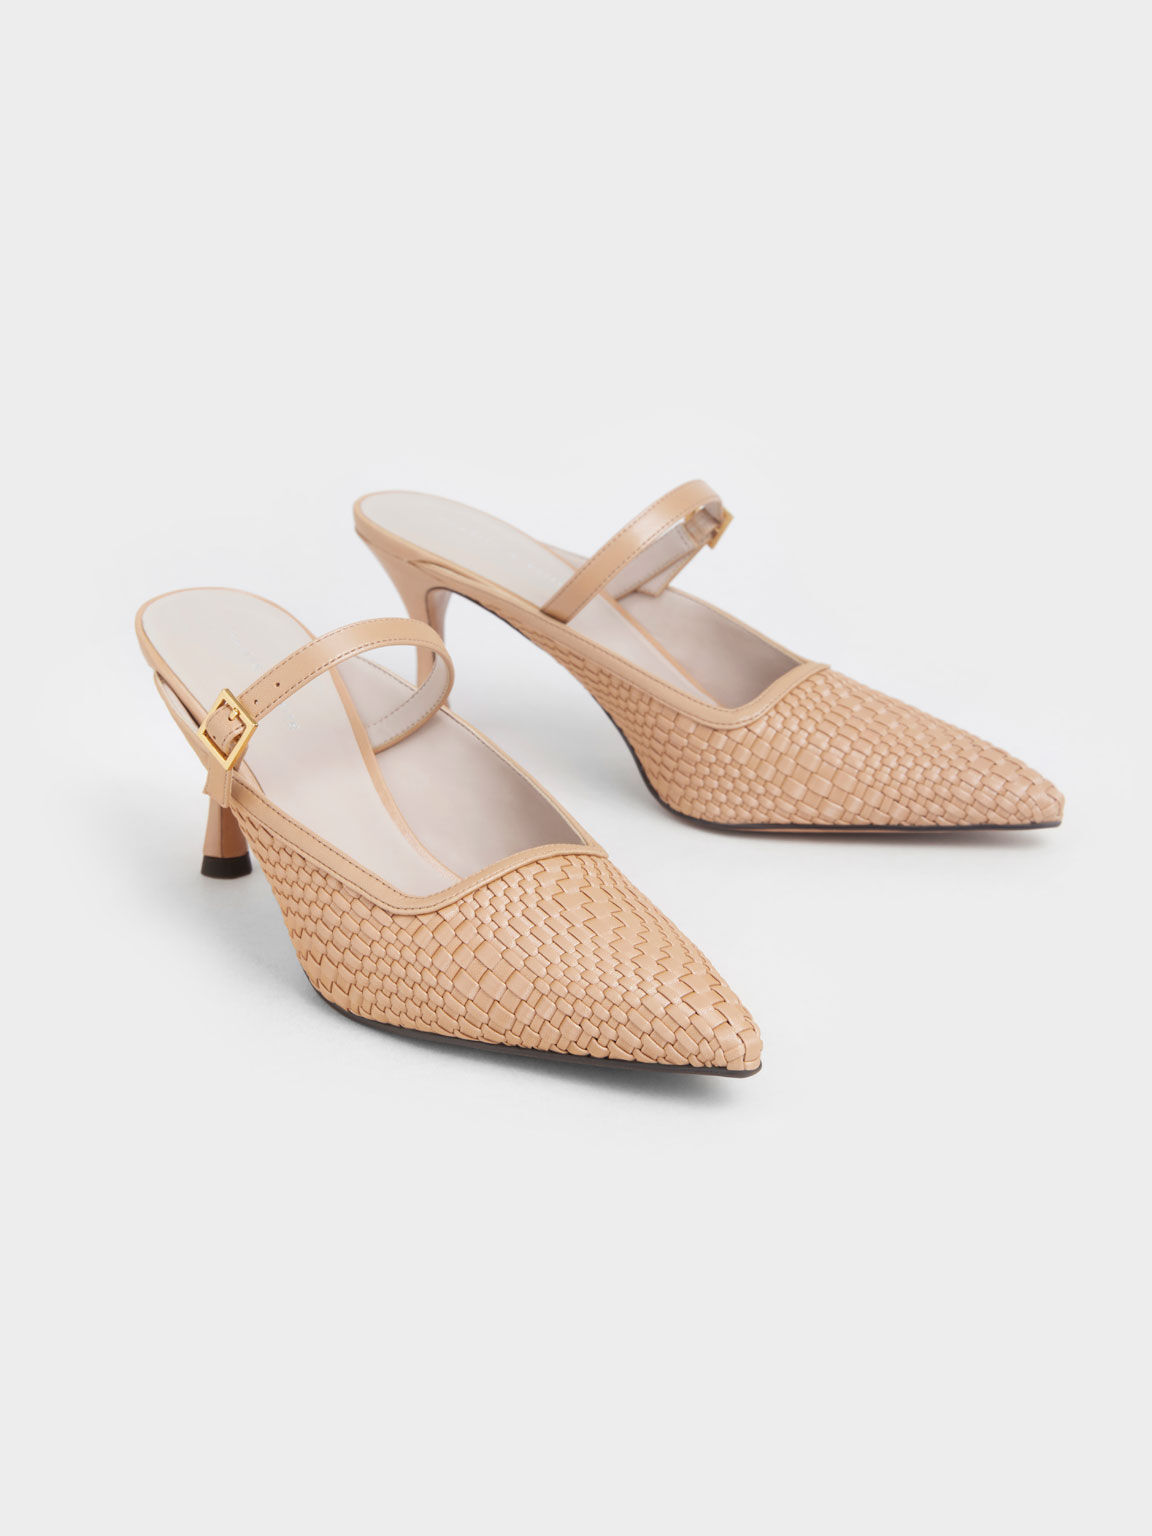 Woven Heeled Mules, Camel, hi-res